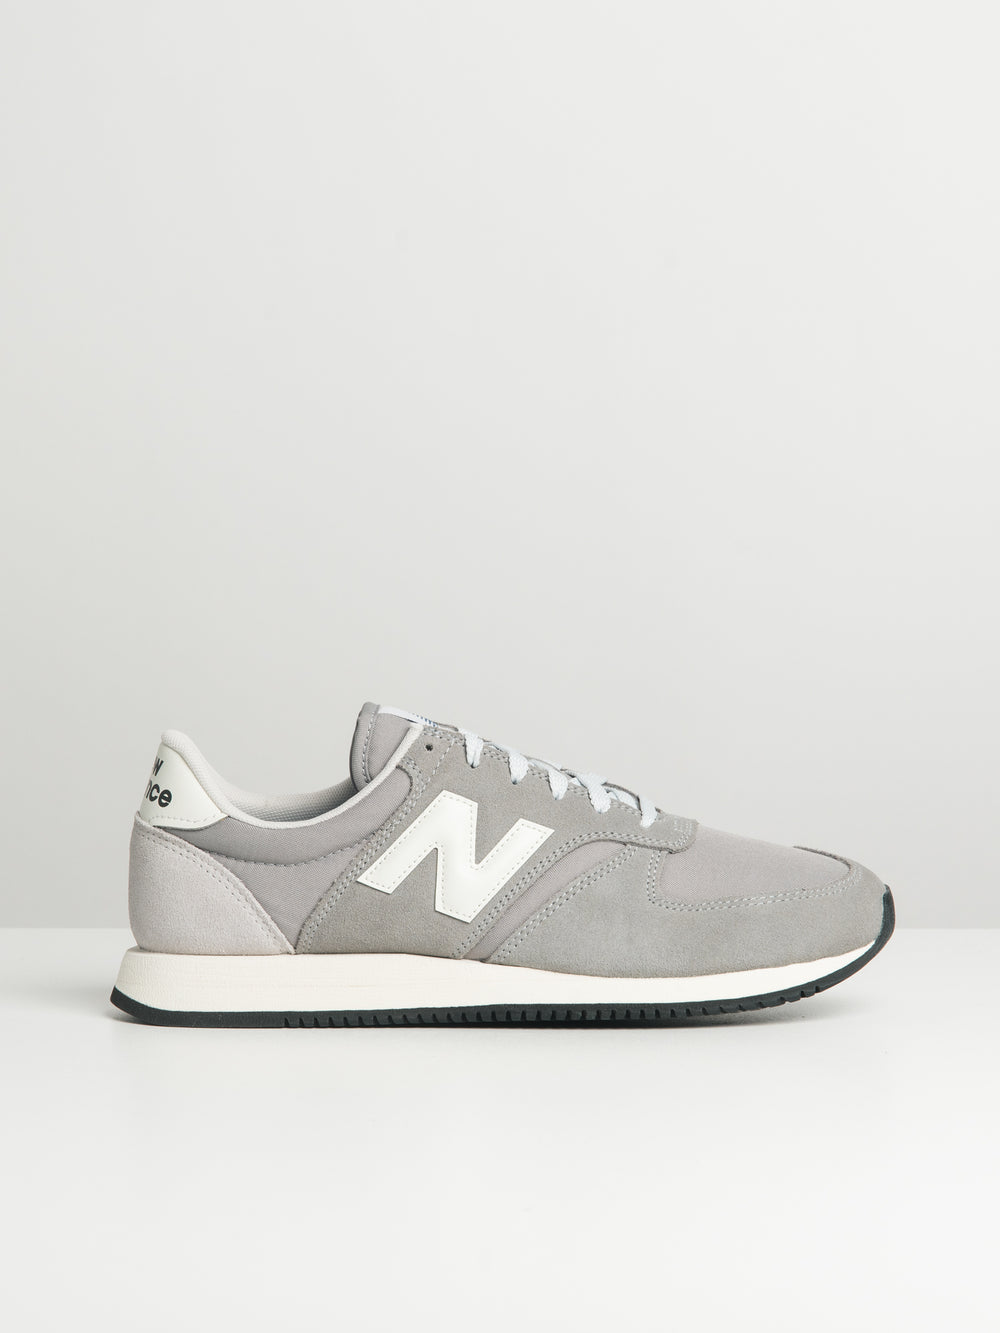 MENS NEW BALANCE THE 420 - CLEARANCE